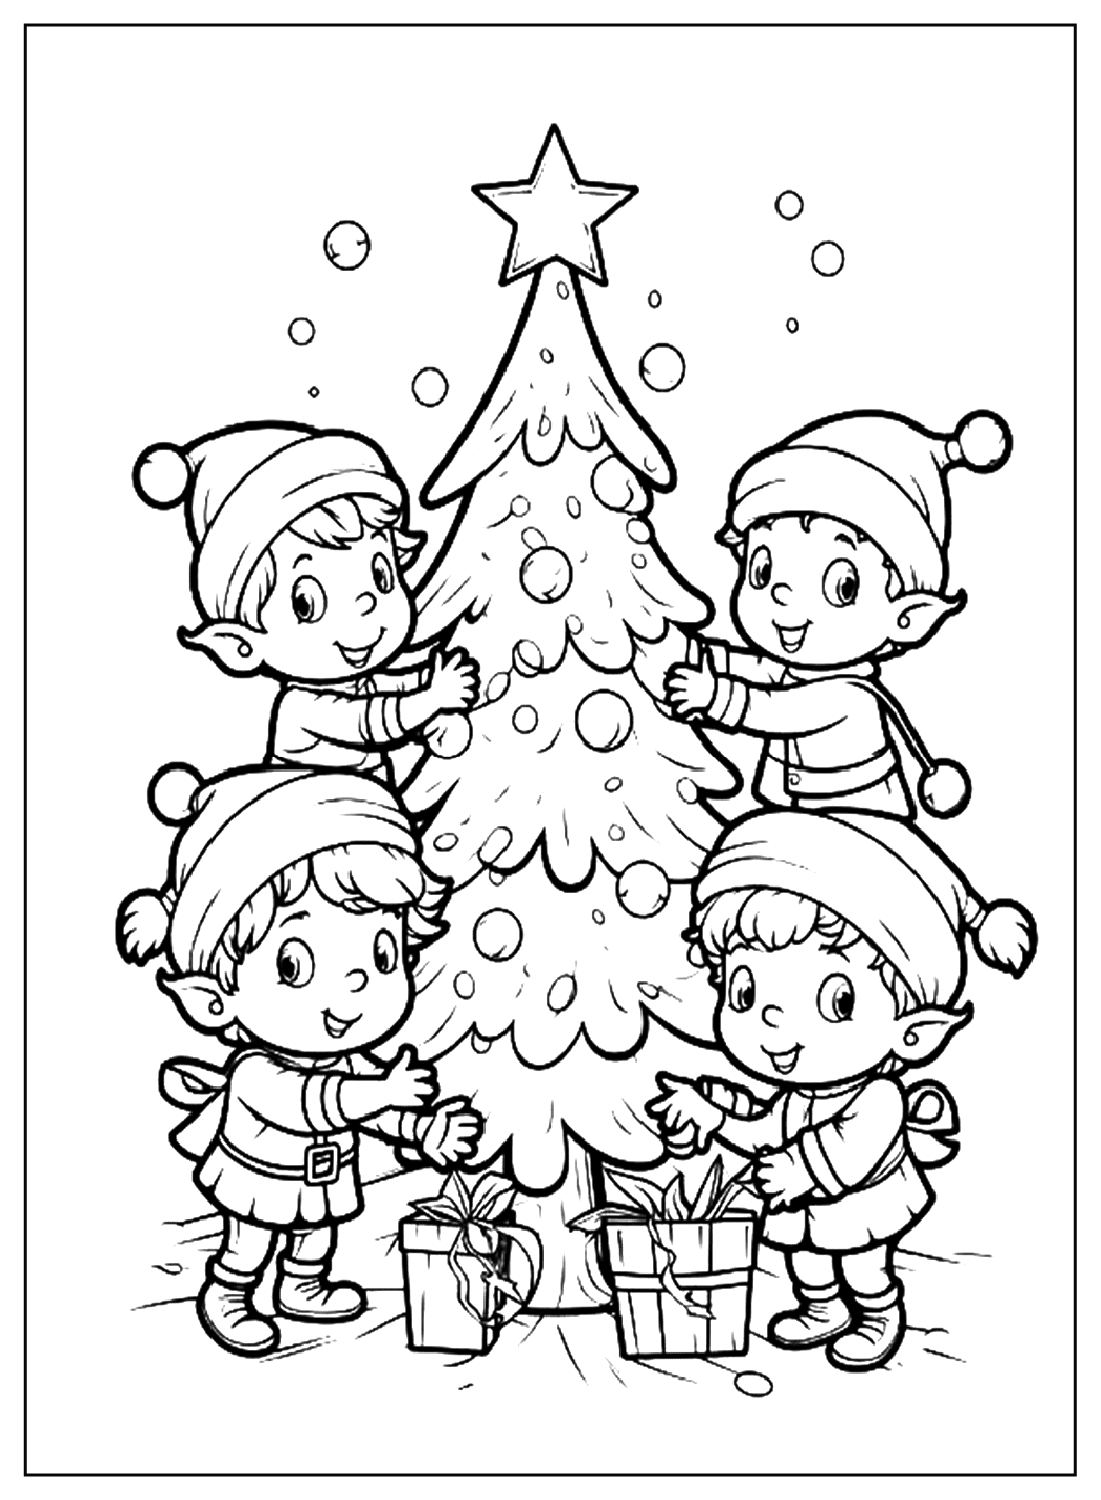 Free Elf Coloring Pages from Elf